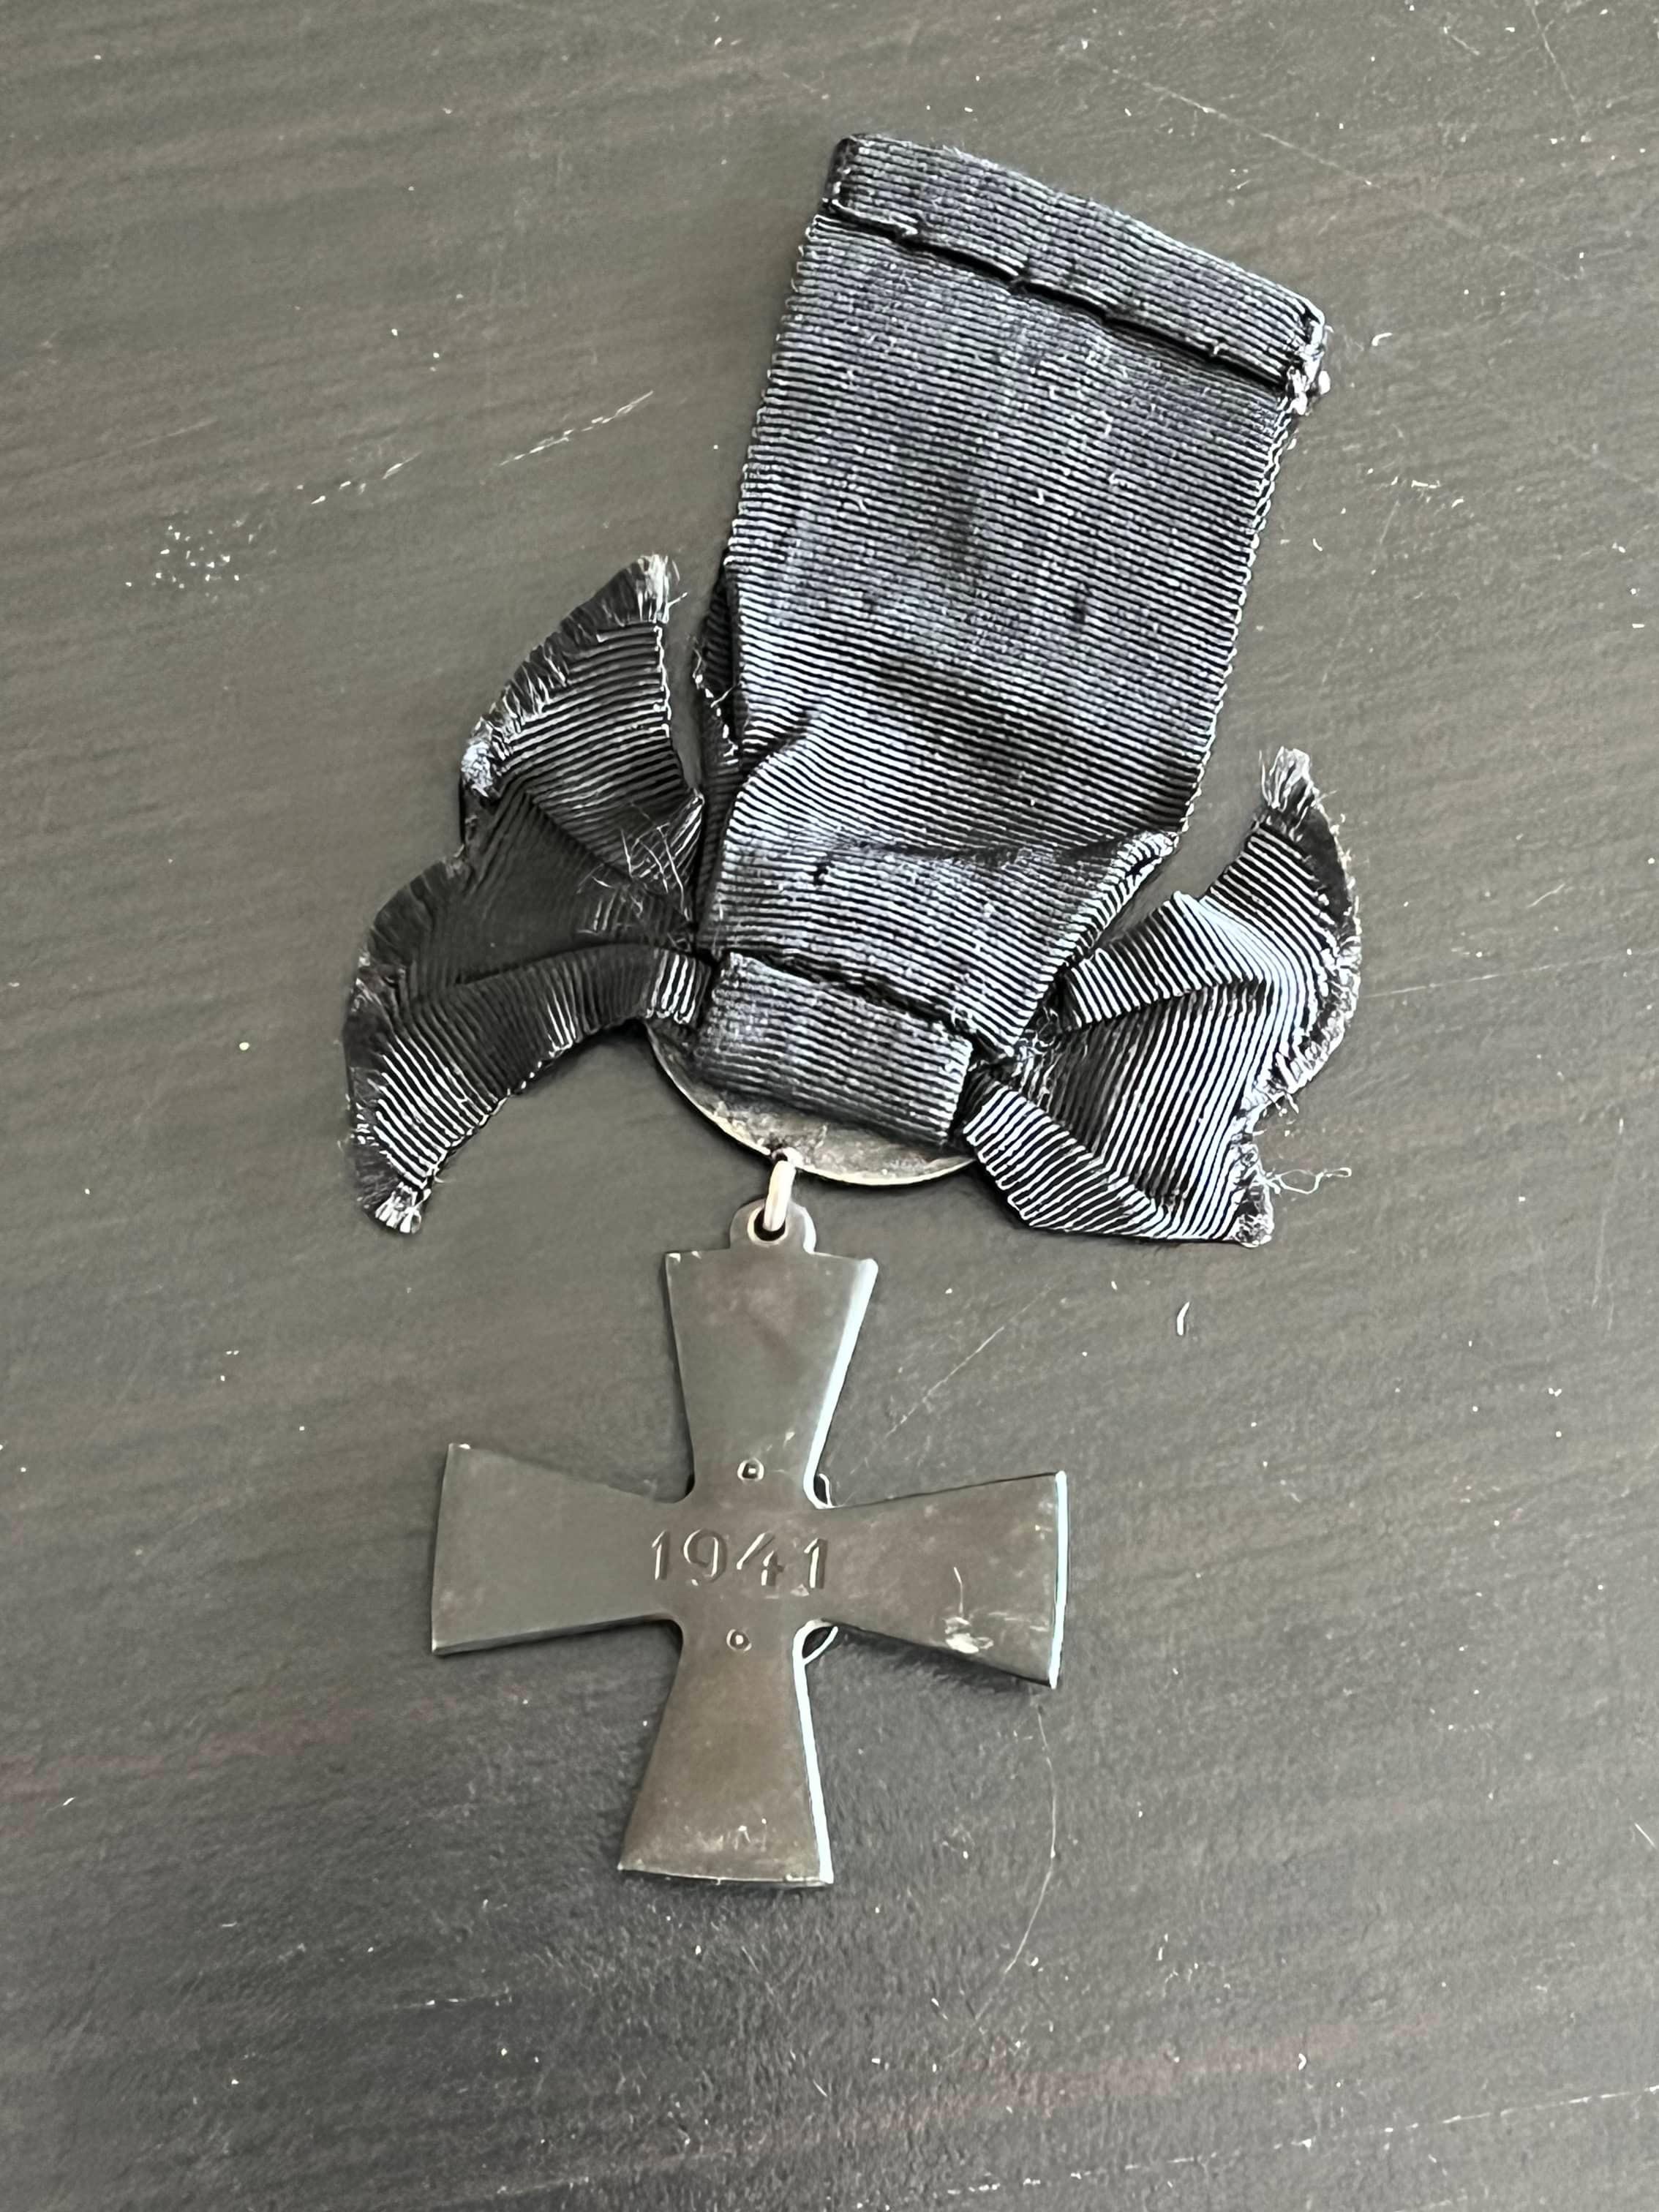 Finland WWII Mourning Order Liberty Cross